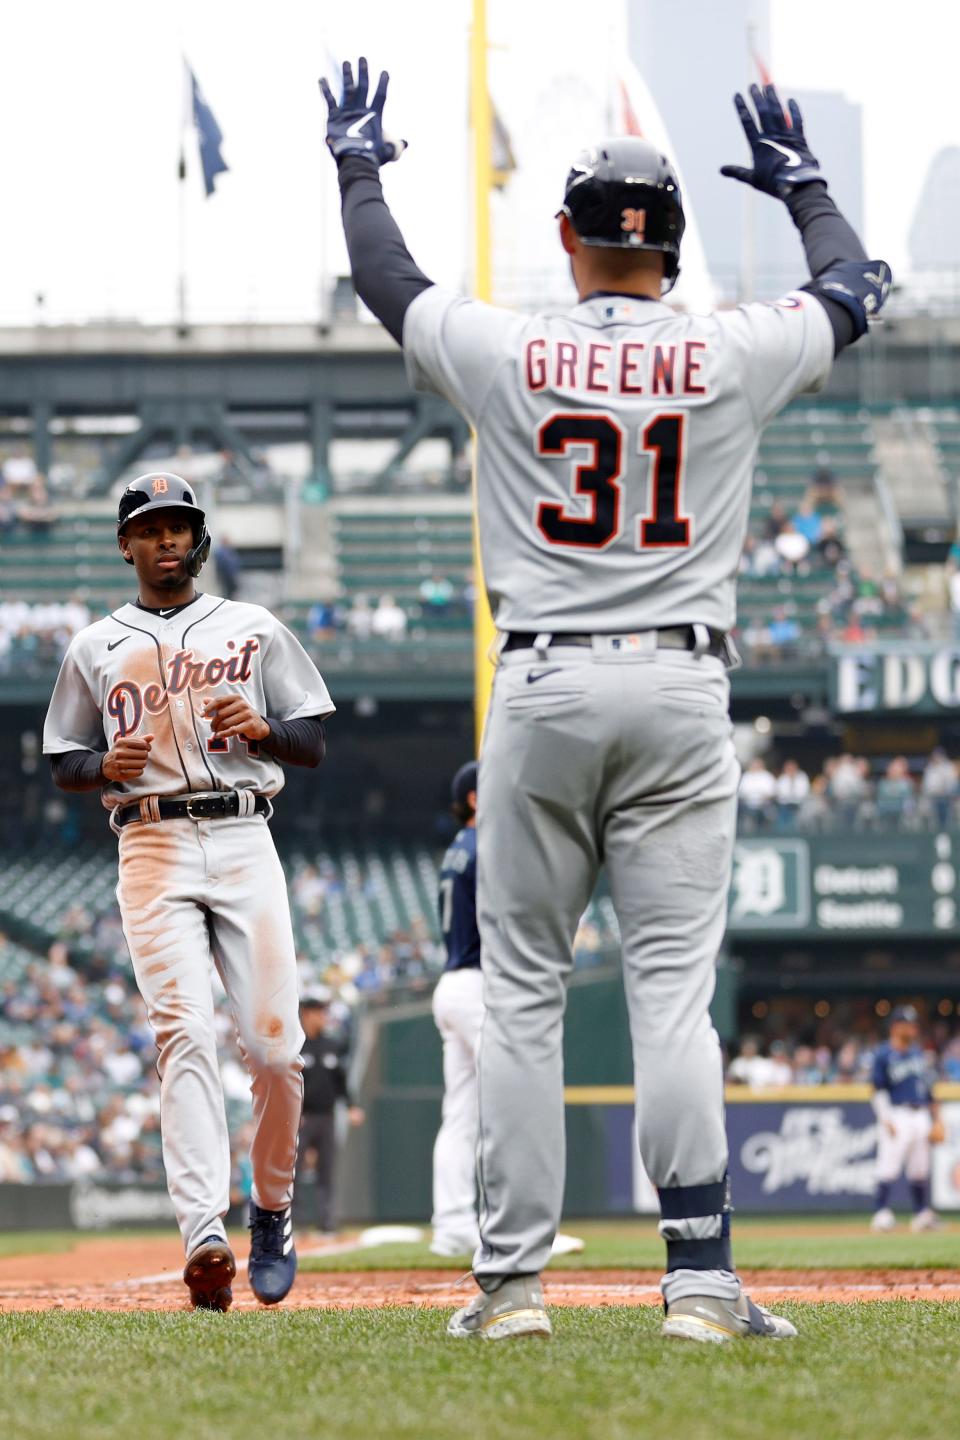 Brendon Davis (74) of the Detroit Tigers scores a run as Riley Greene (31) waits for him during the fifth inning of the game against the Seattle Mariners at T-Mobile Park on October 05, 2022 in Seattle.